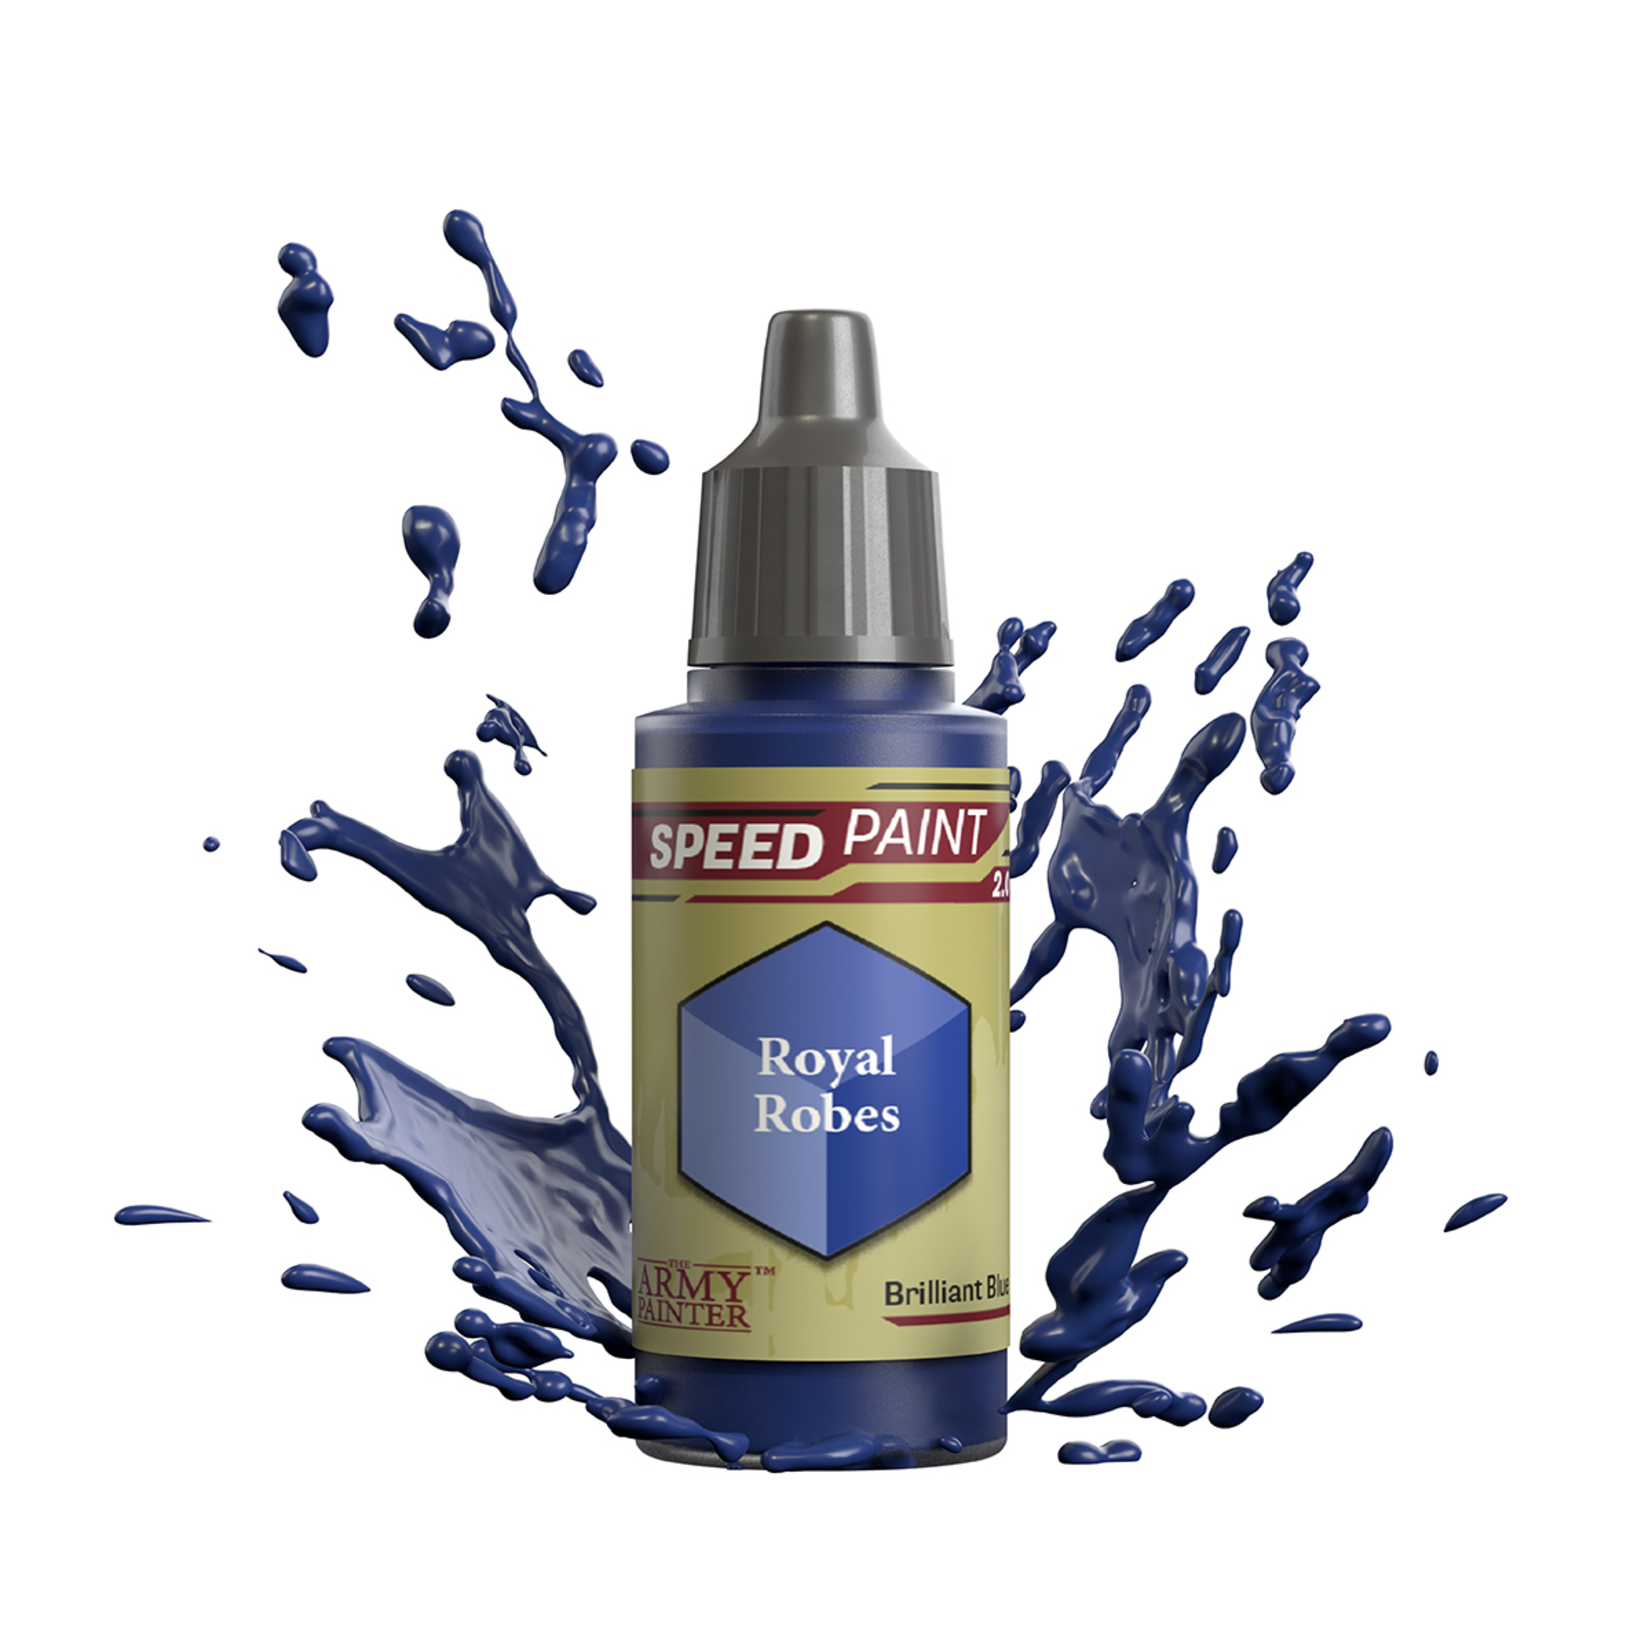 Army Painter Army Painter Speedpaint 2.0 Royal Robes 18 ml Brilliant Blue